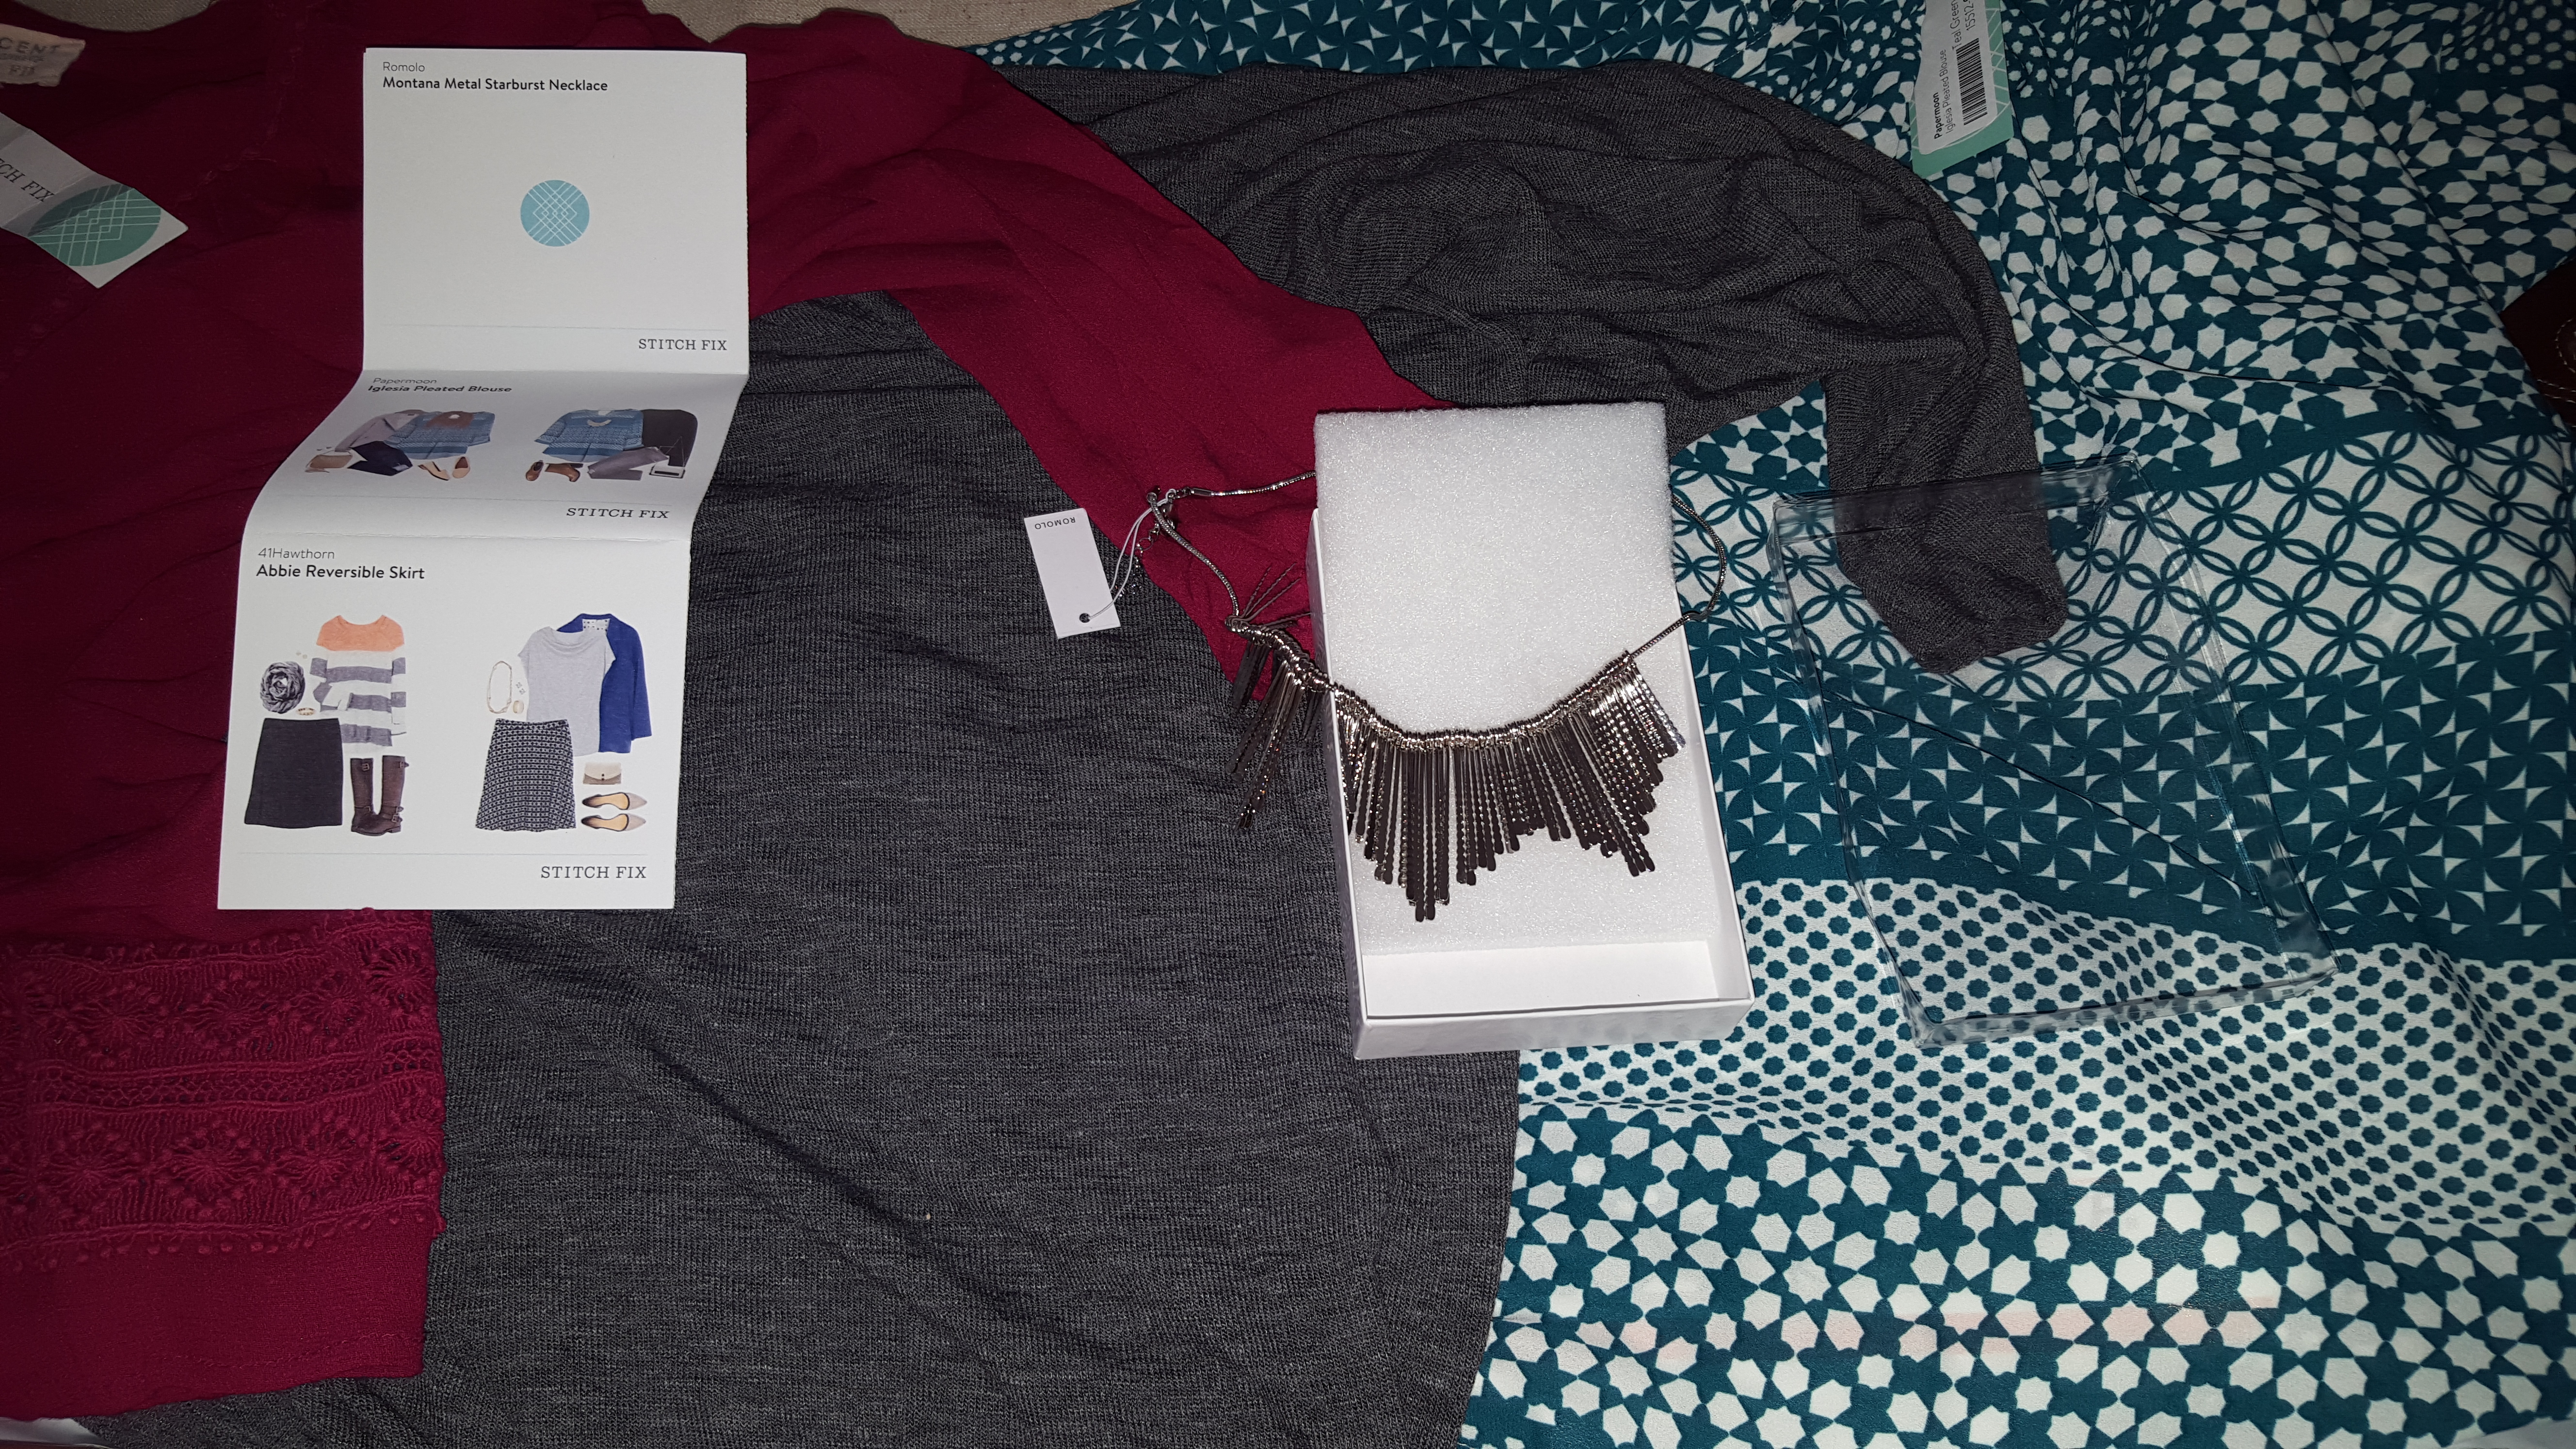 My review of Stitch Fix by Terry Ryan for Slimhealthysexy.com